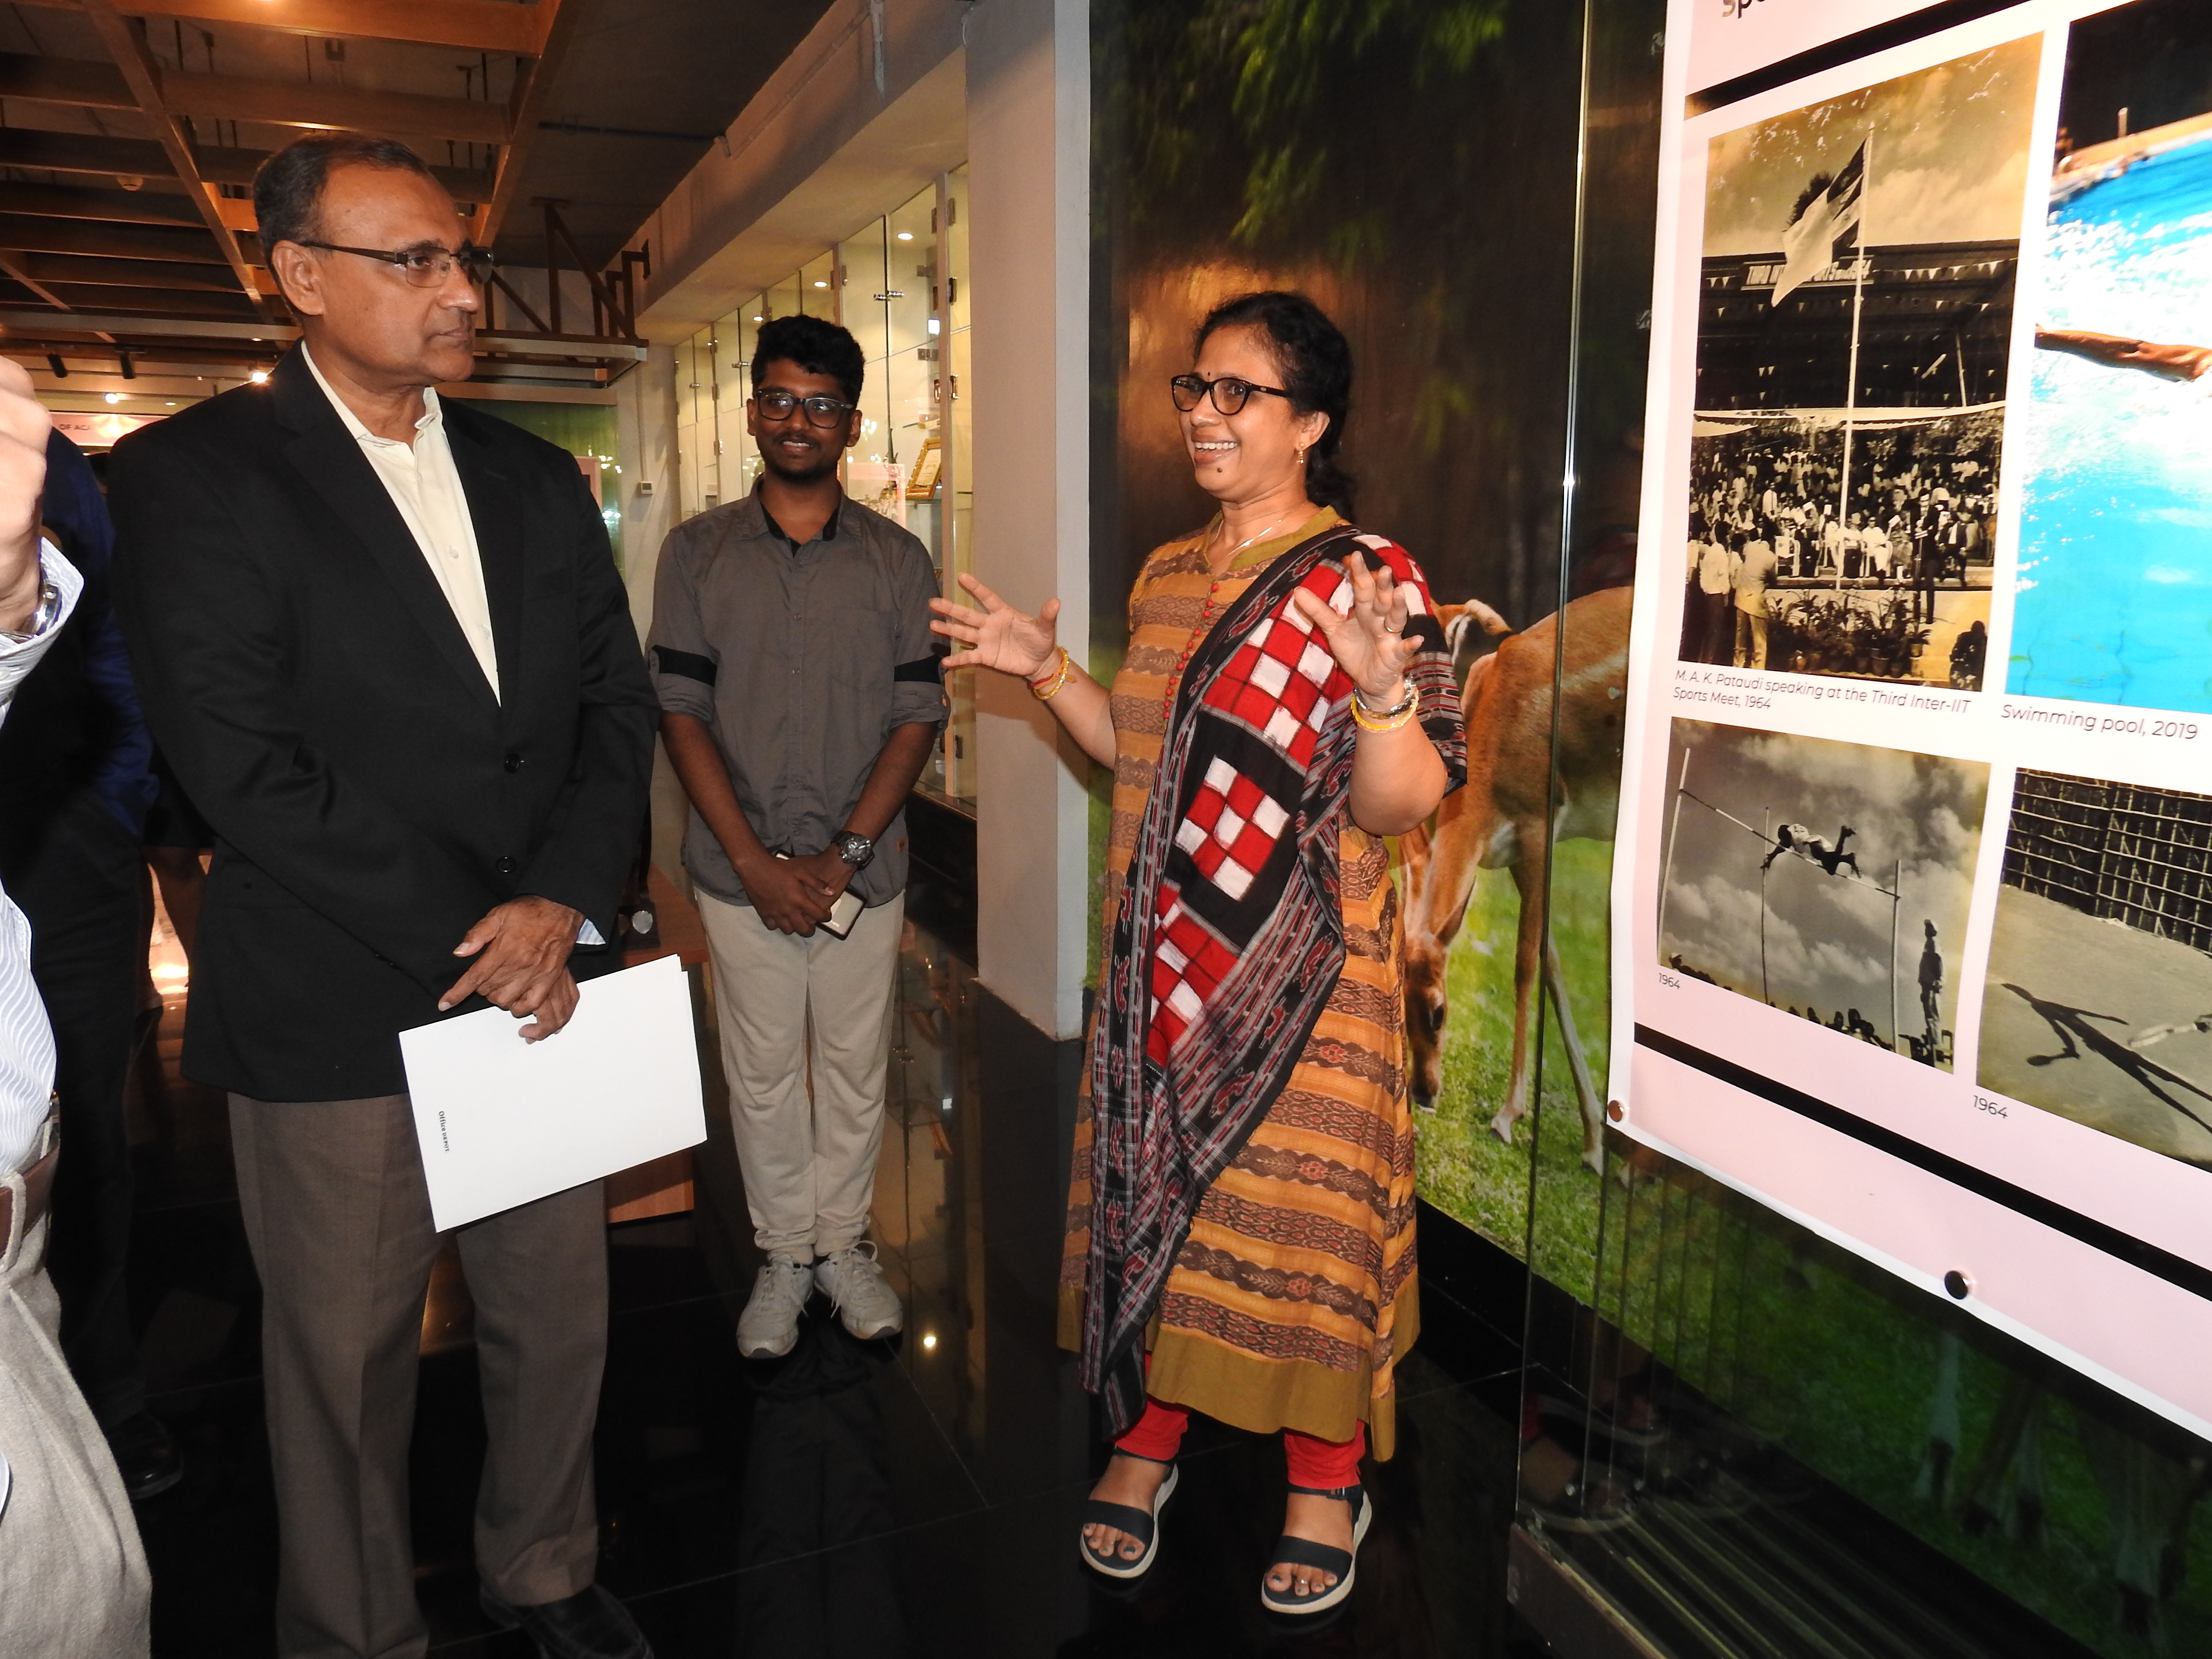 Ms. Mamata Dash (Senior Project Officer) explains a point to Mr. T. S. Tirumurti 